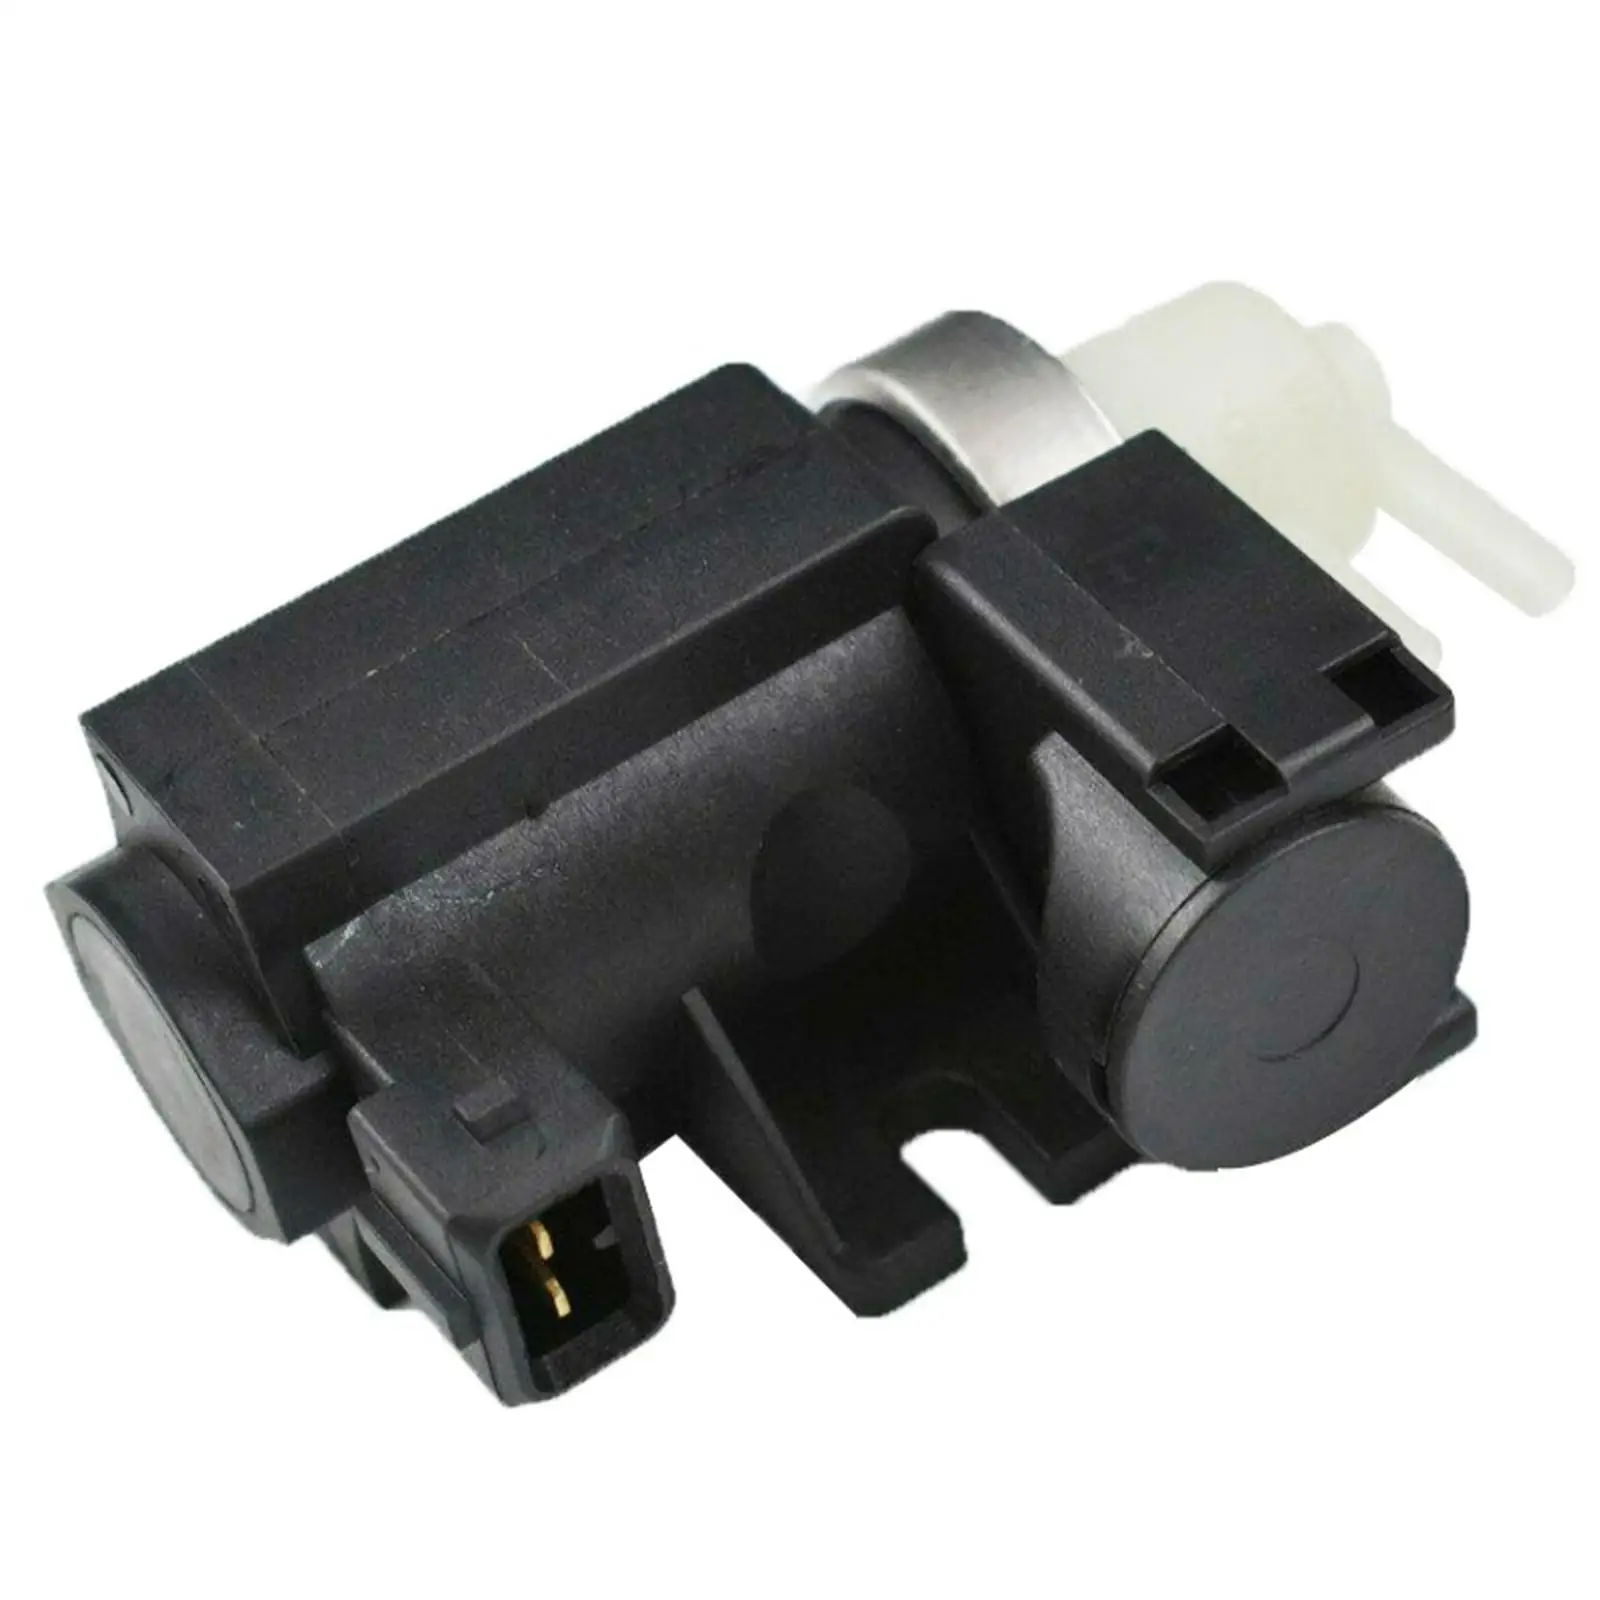 Automotive  Solenoid 11747626350 700887190 Pressure Converter Replacement Part 2 Pin for 35i